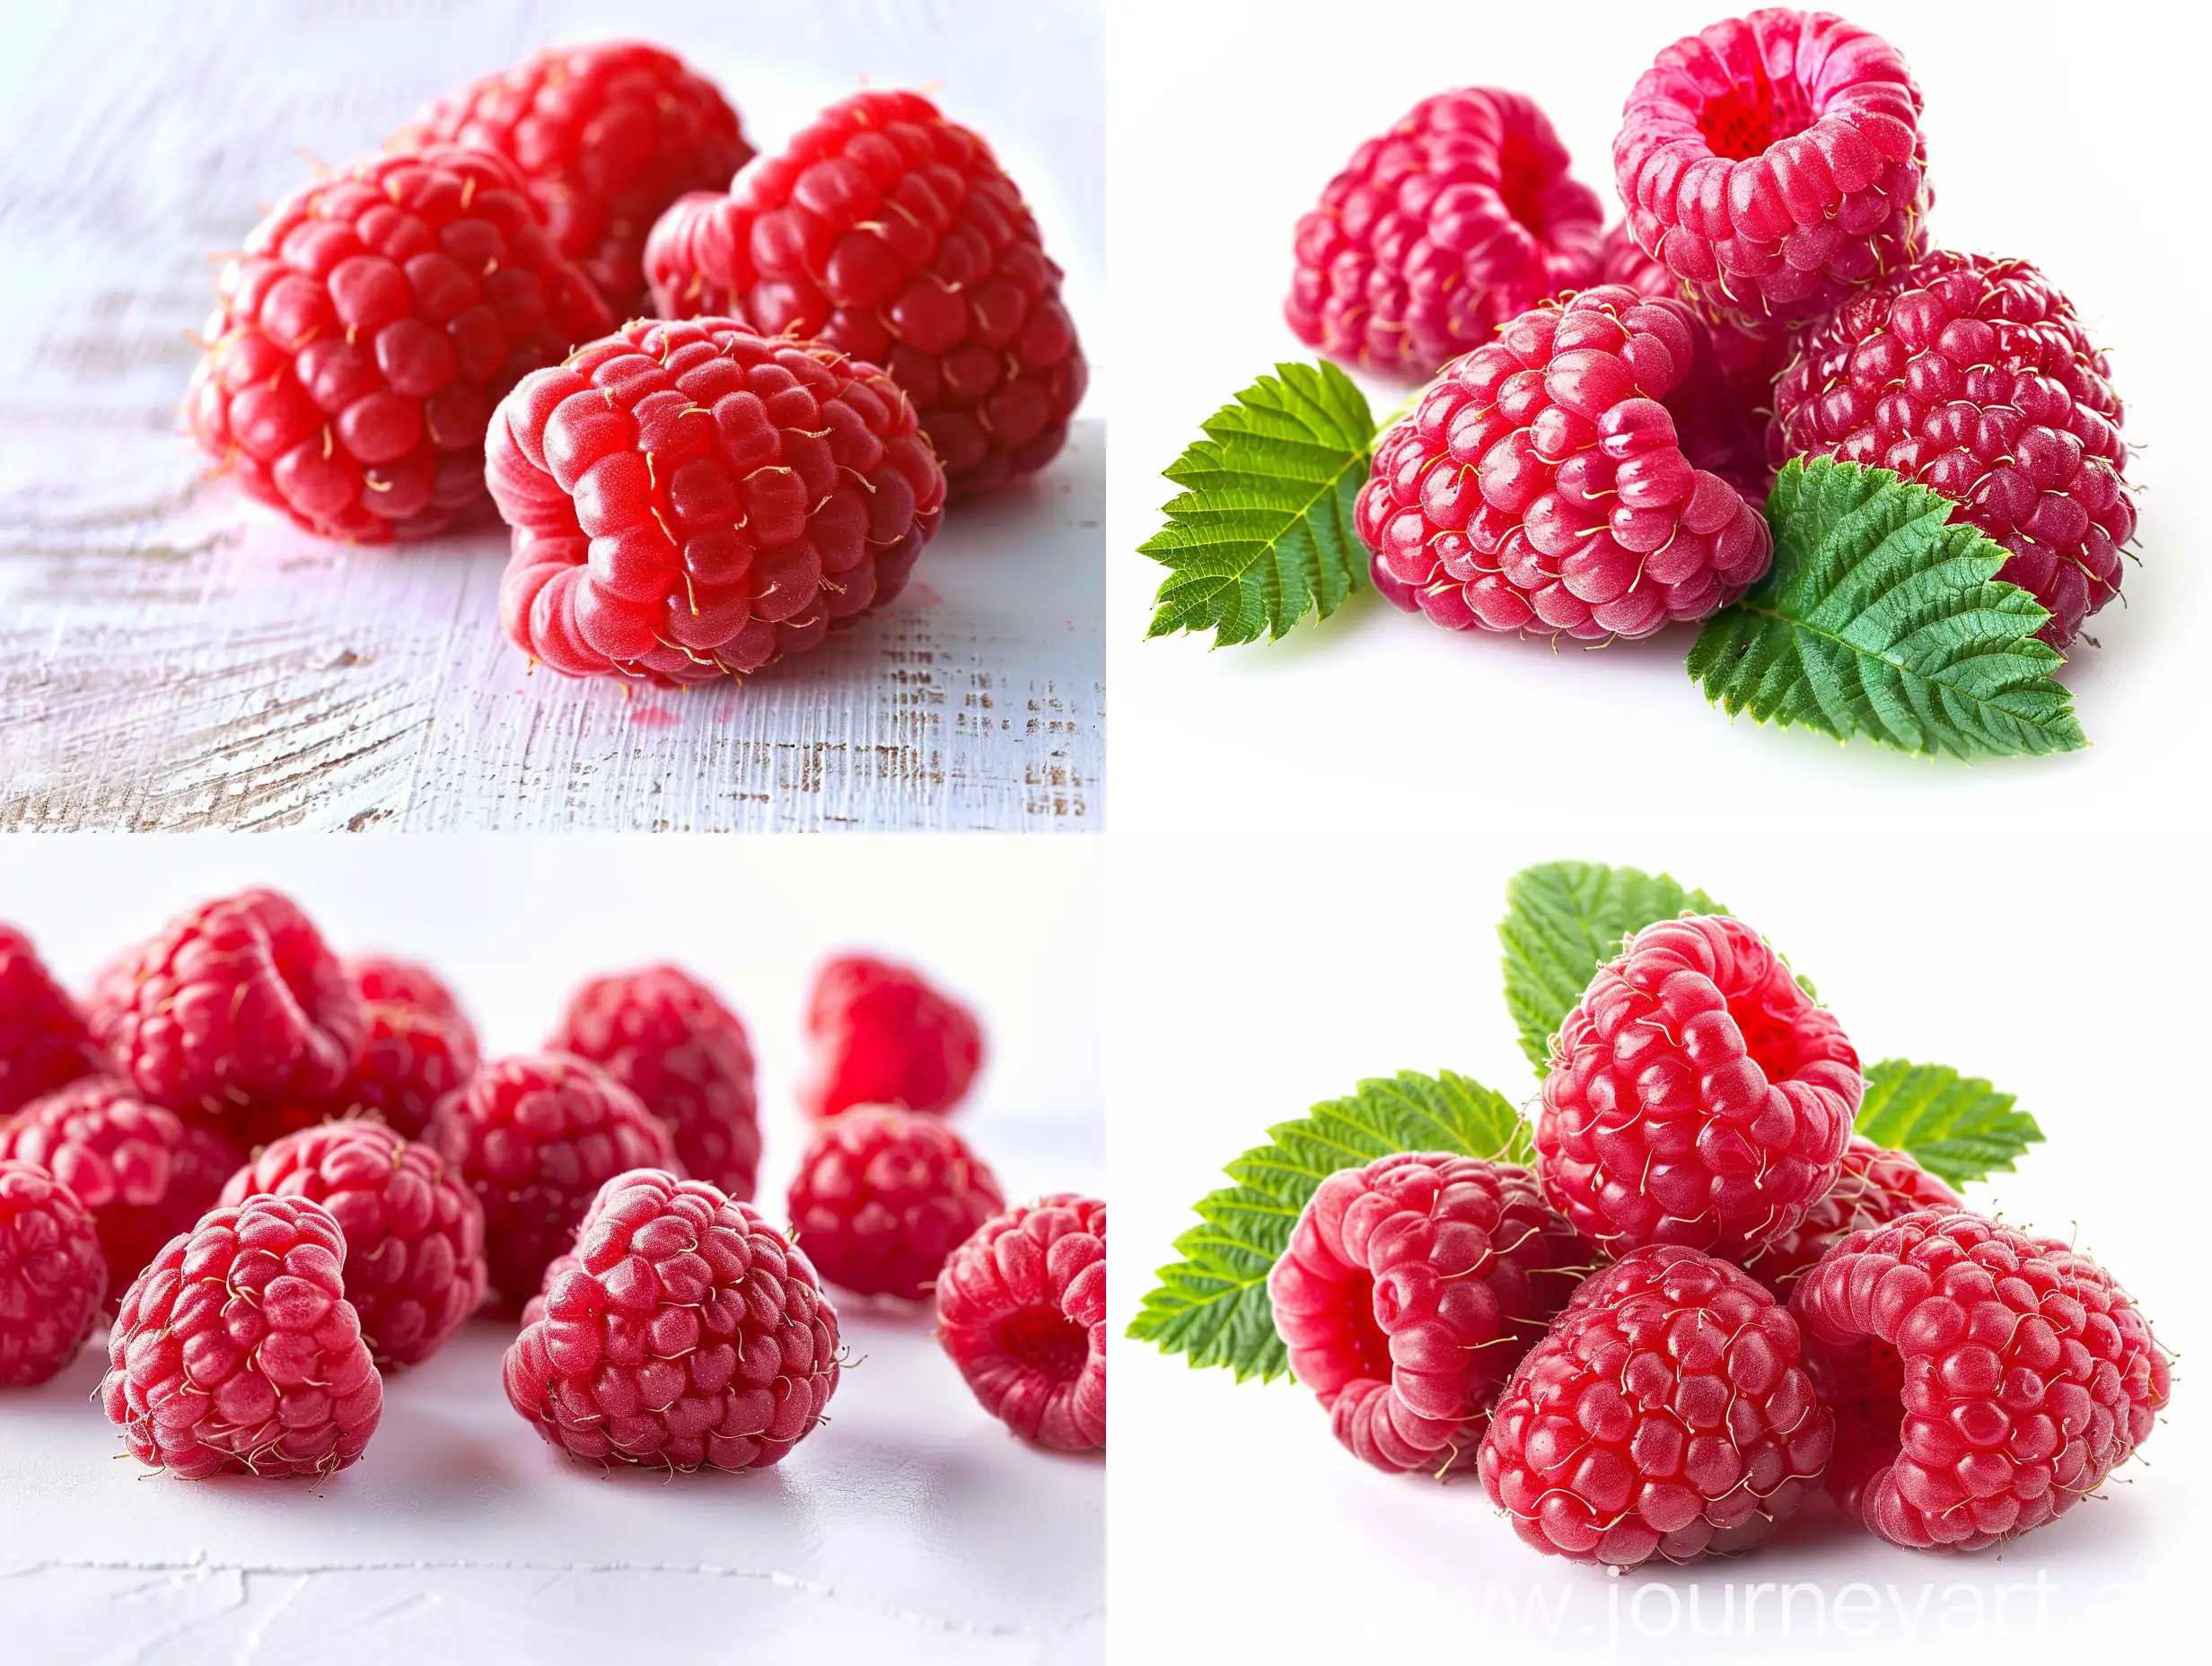 Vibrant-Raspberry-Advertisement-with-Focus-on-Variety-and-Visual-Appeal